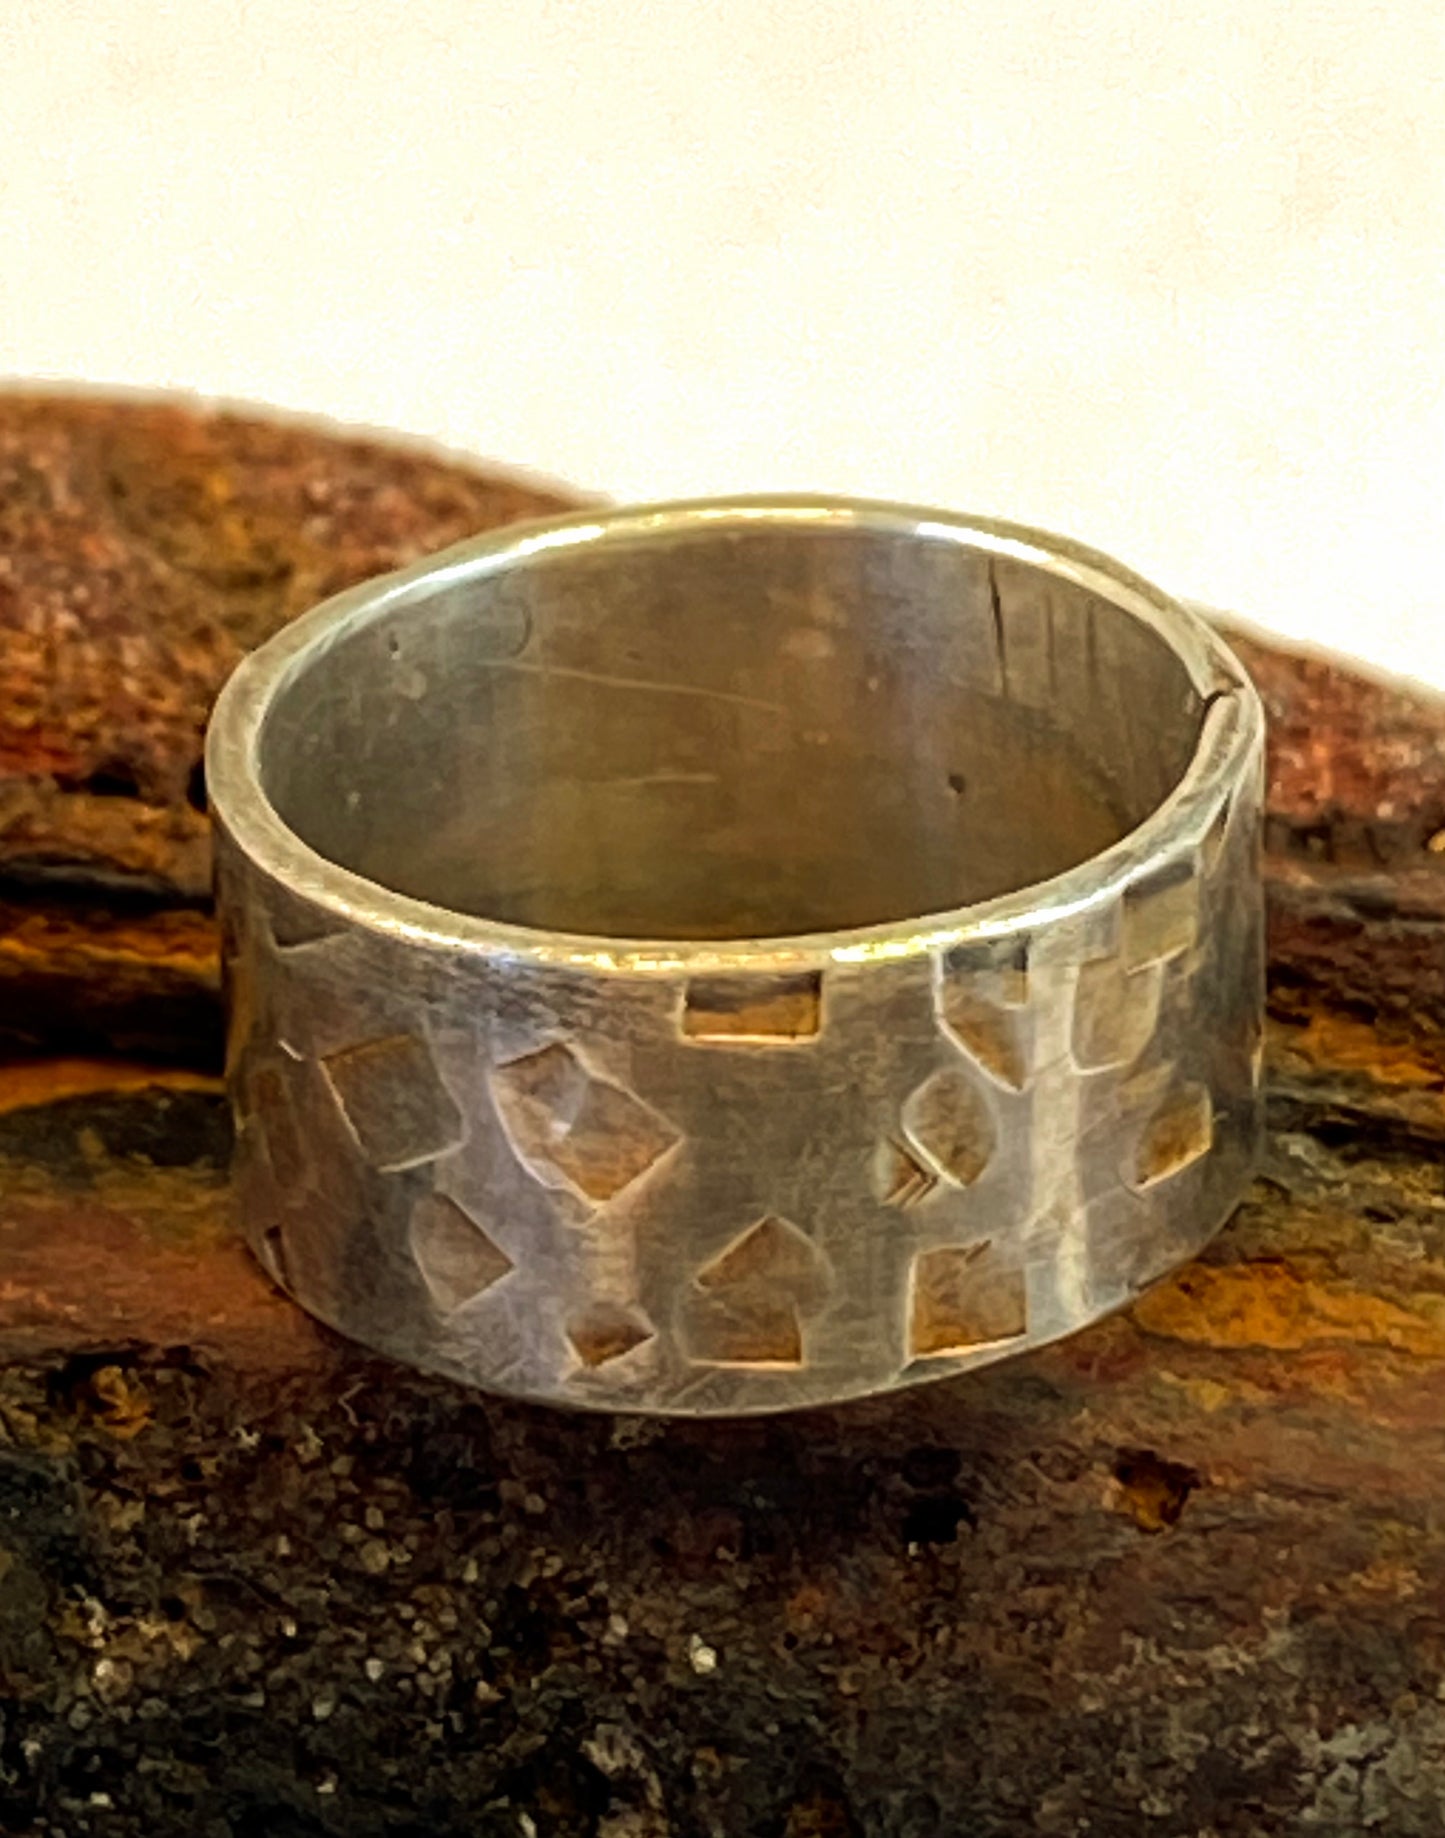 One-of-a-kind hand-crafted sterling silver "cigar band" ring.      Band is beautifully textured with squarish organic shapes.     Gorgeous organic patina that will evolve with you as you wear it.      Ring size 5-1/4.      Style: rustic, boho, funky, organic, earthy yet elegant.